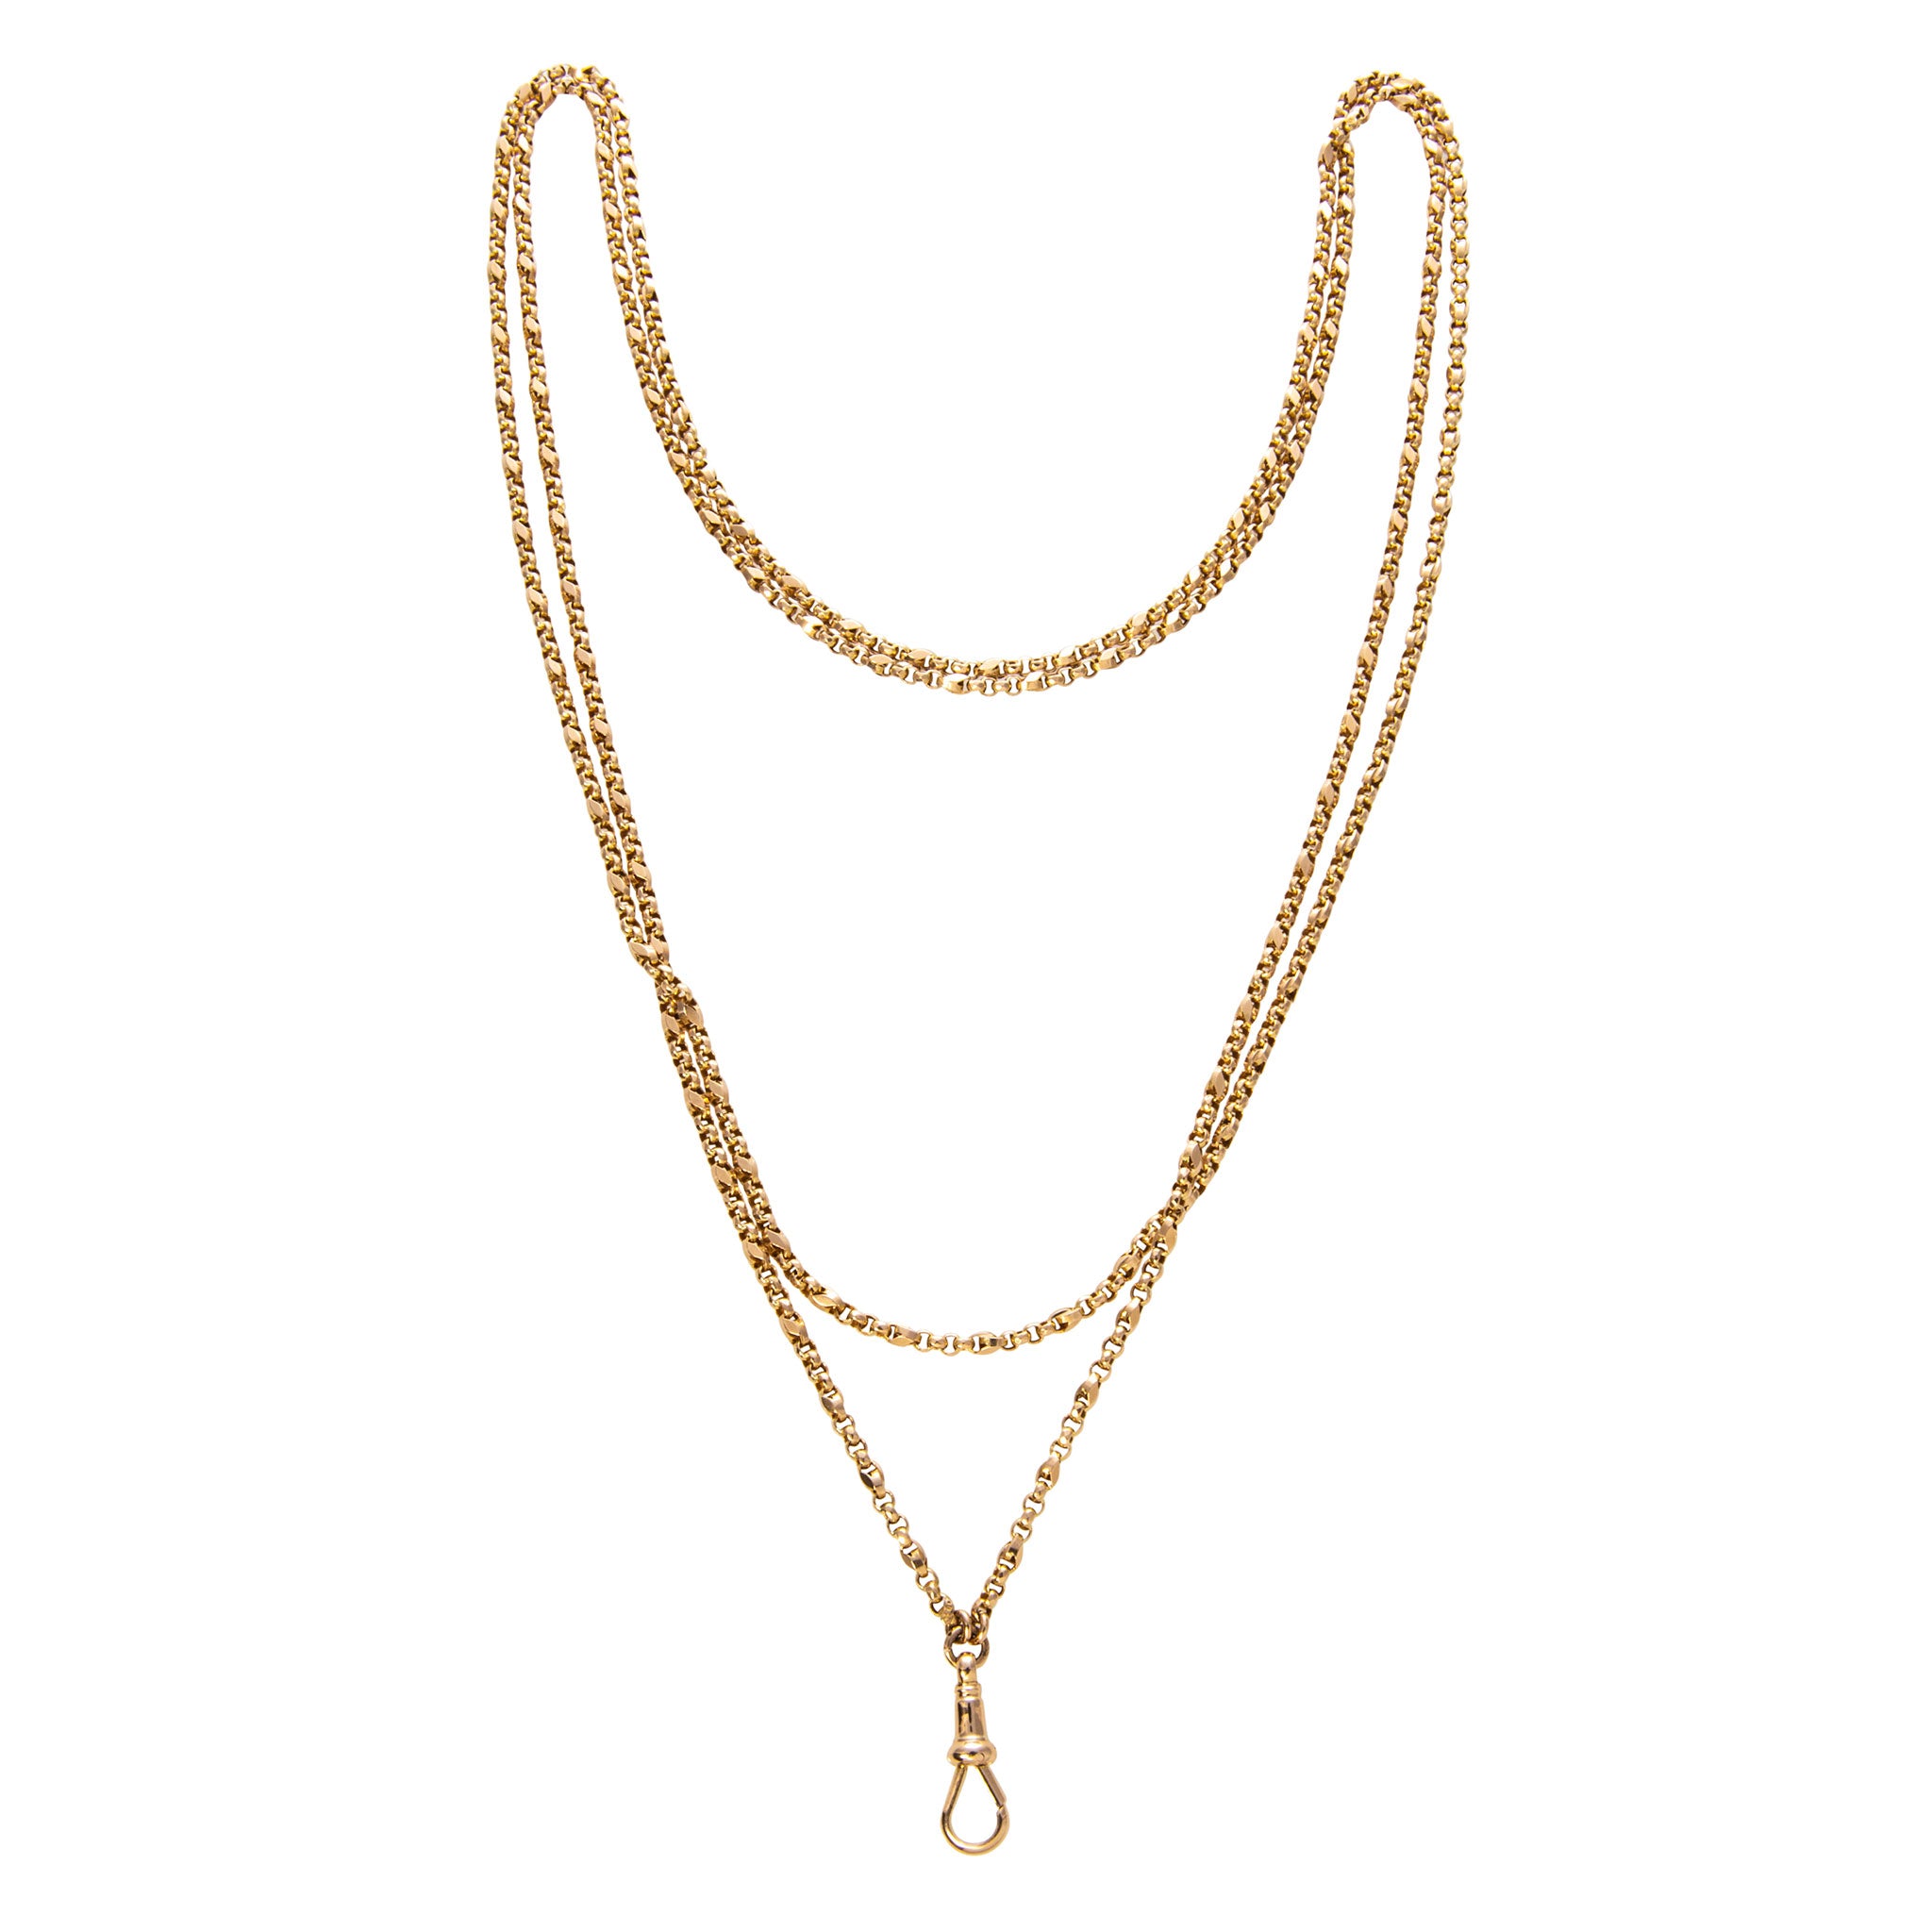 Victorian 15K Yellow Gold Guard Chain Necklace 57″